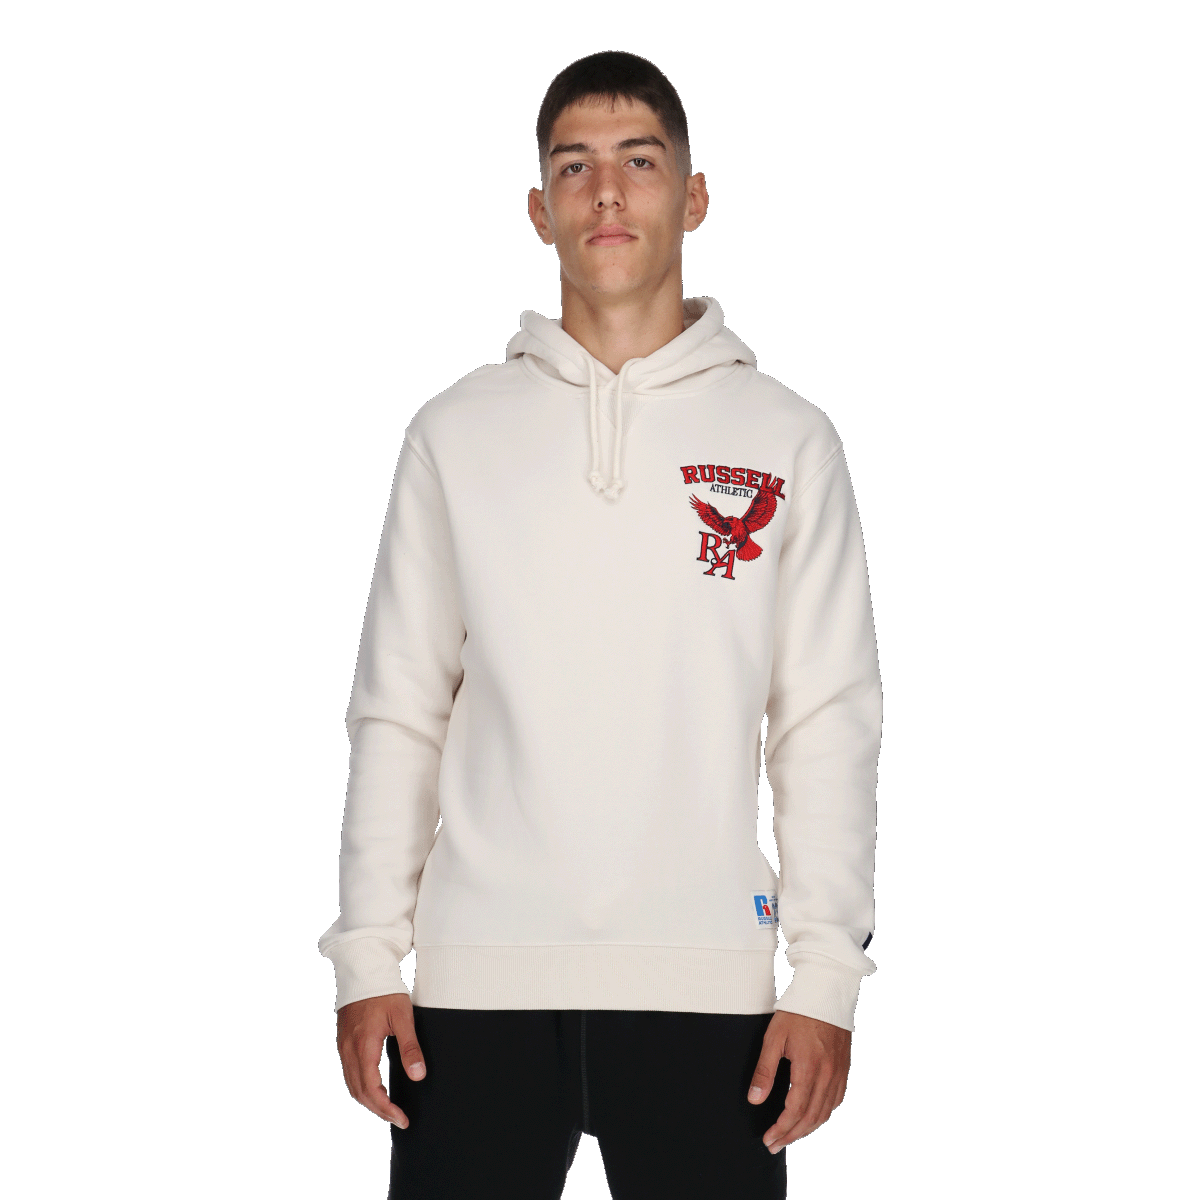 BARRY-PULL OVER HOODY